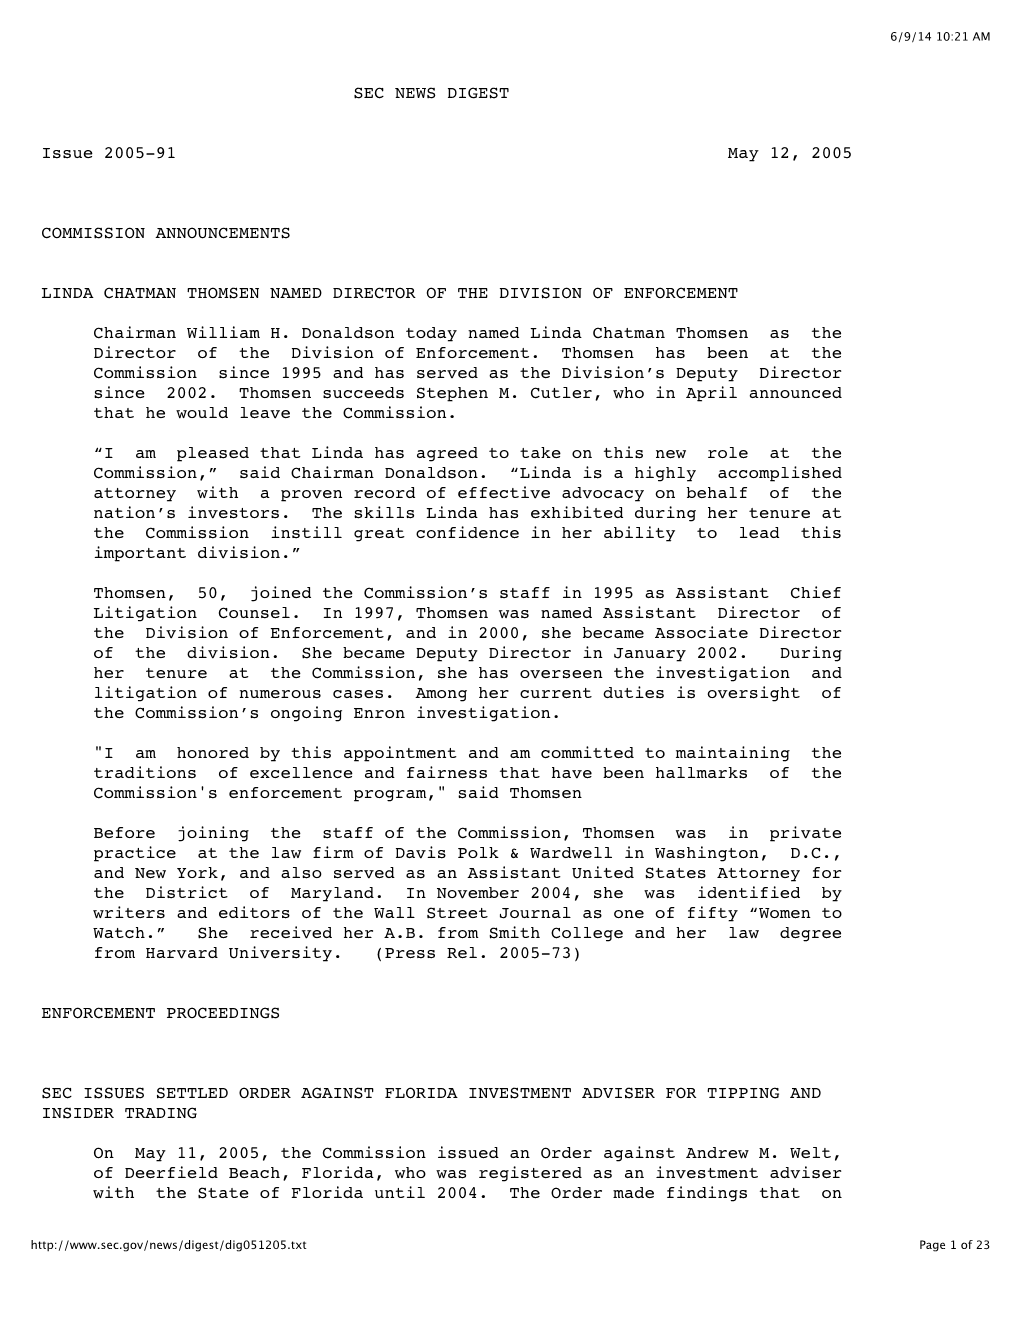 SEC NEWS DIGEST Issue 2005-91 May 12, 2005 COMMISSION